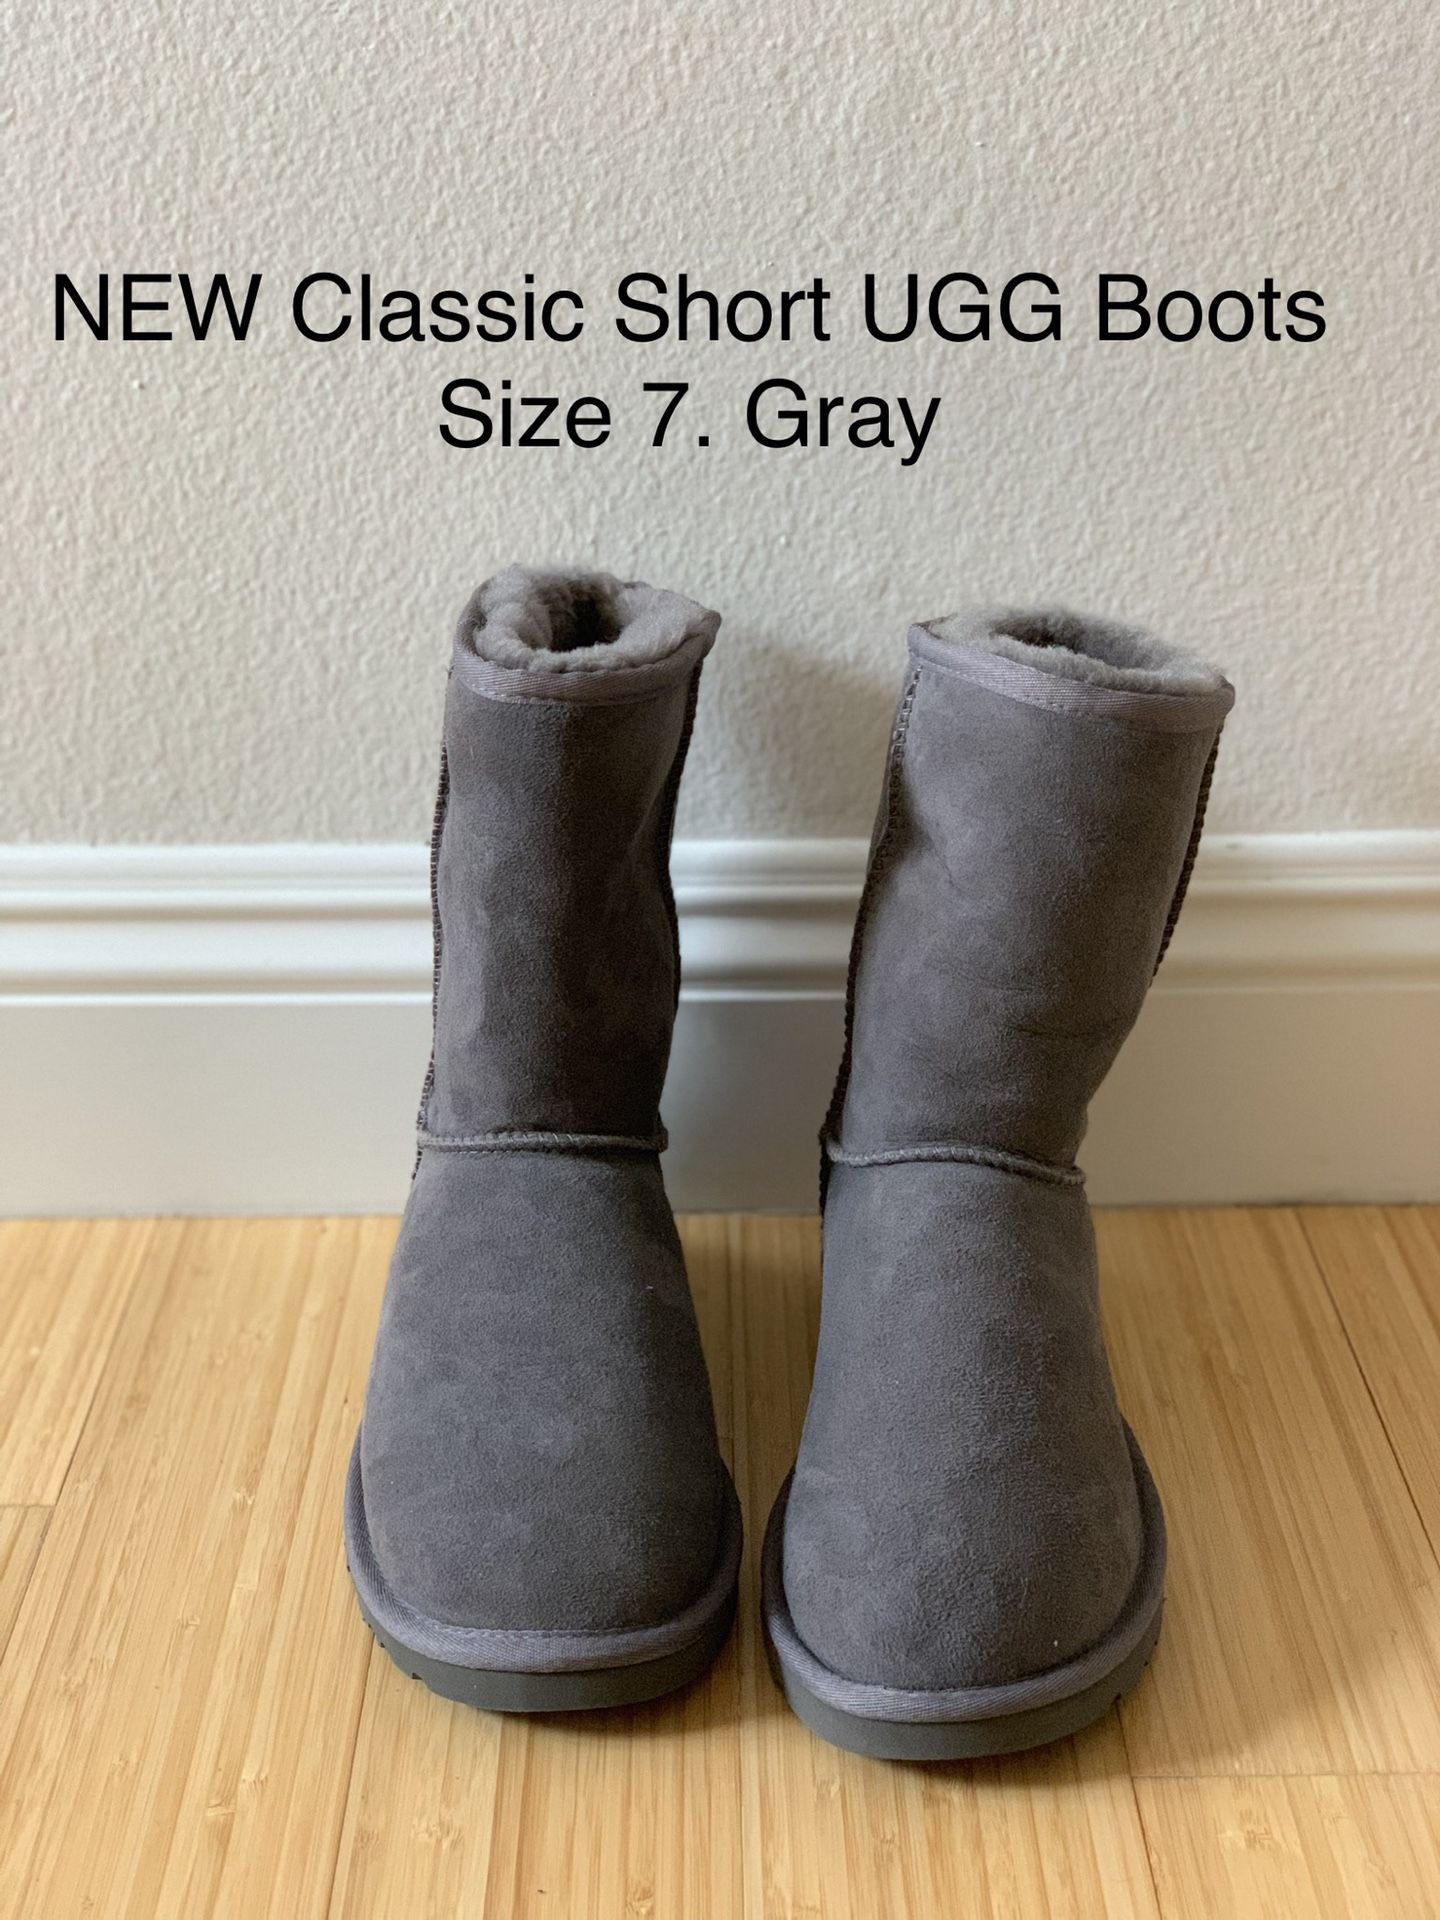 NEW Classic Short UGG Boots. Size 7. Gray